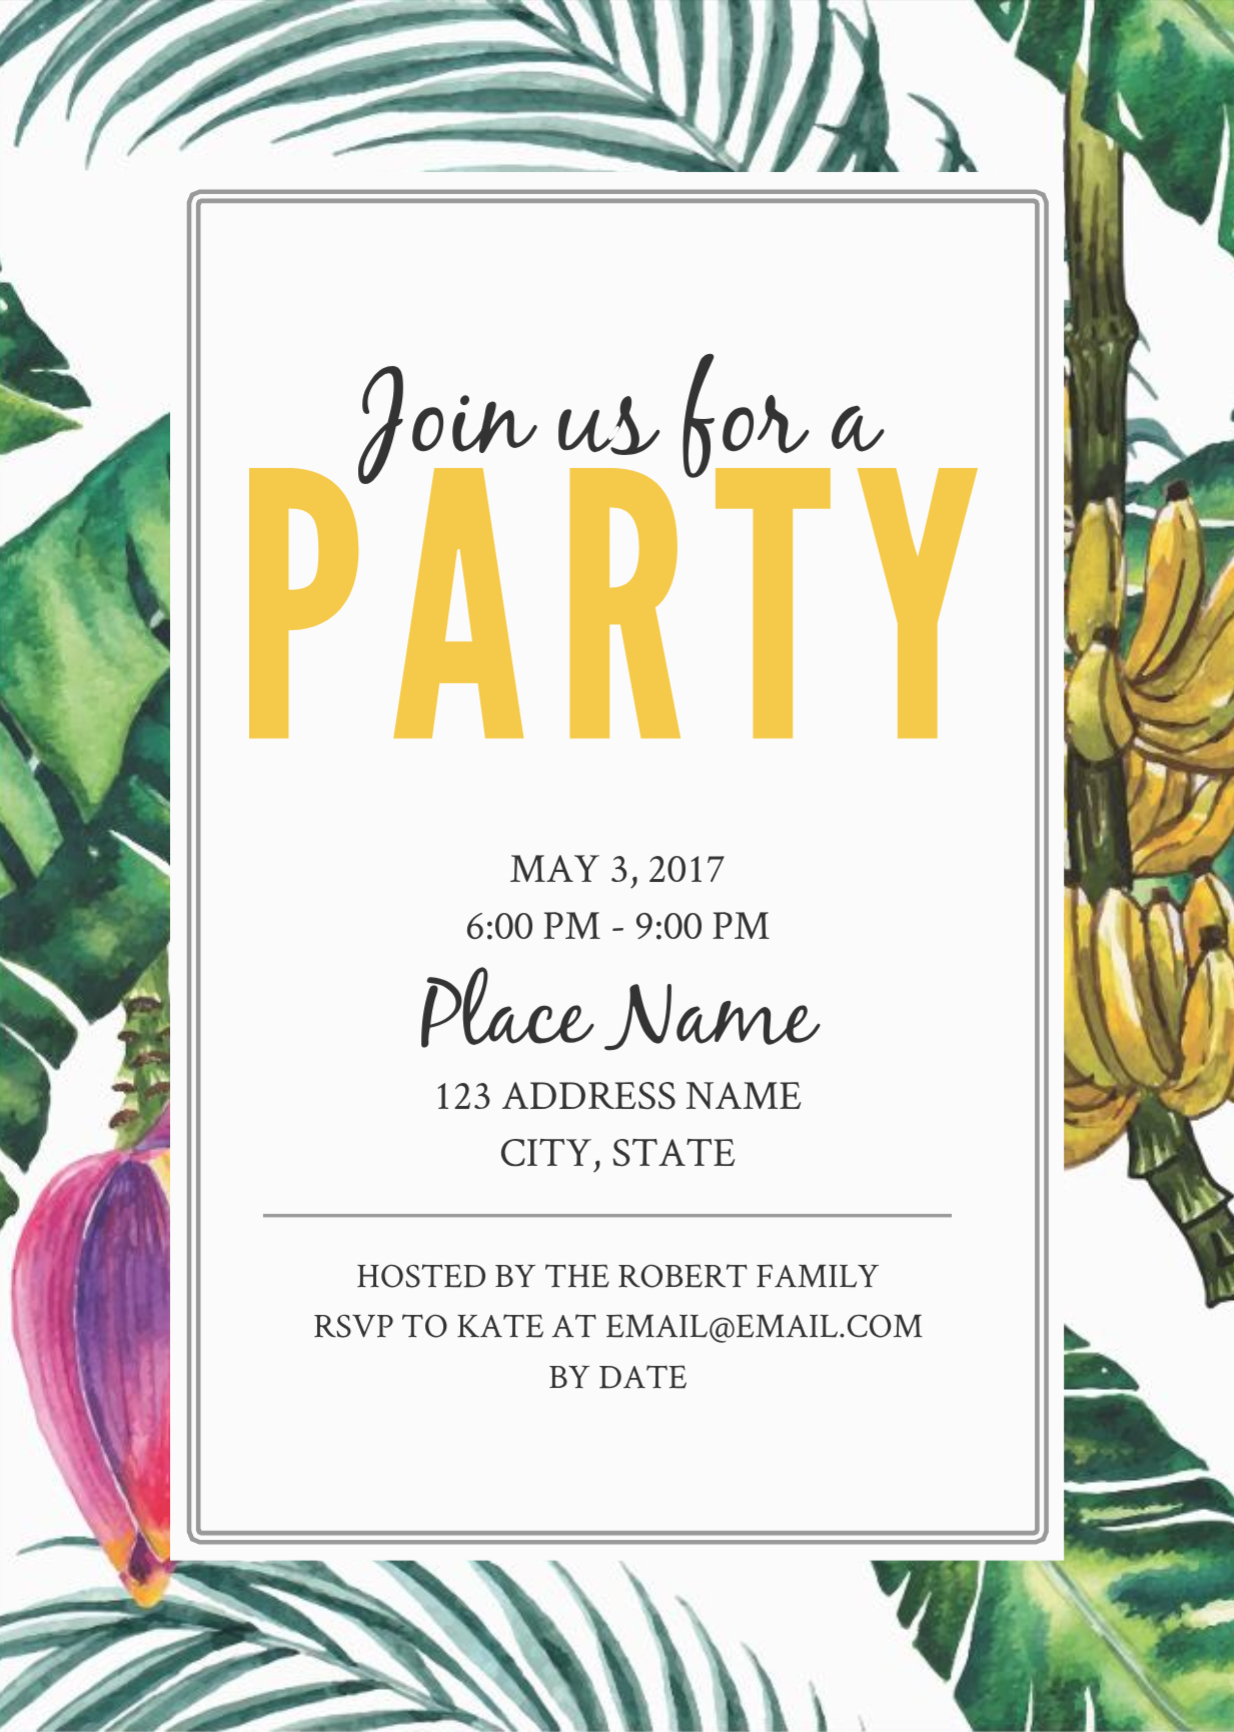 Online Invitations Templates • Business Template Ideas